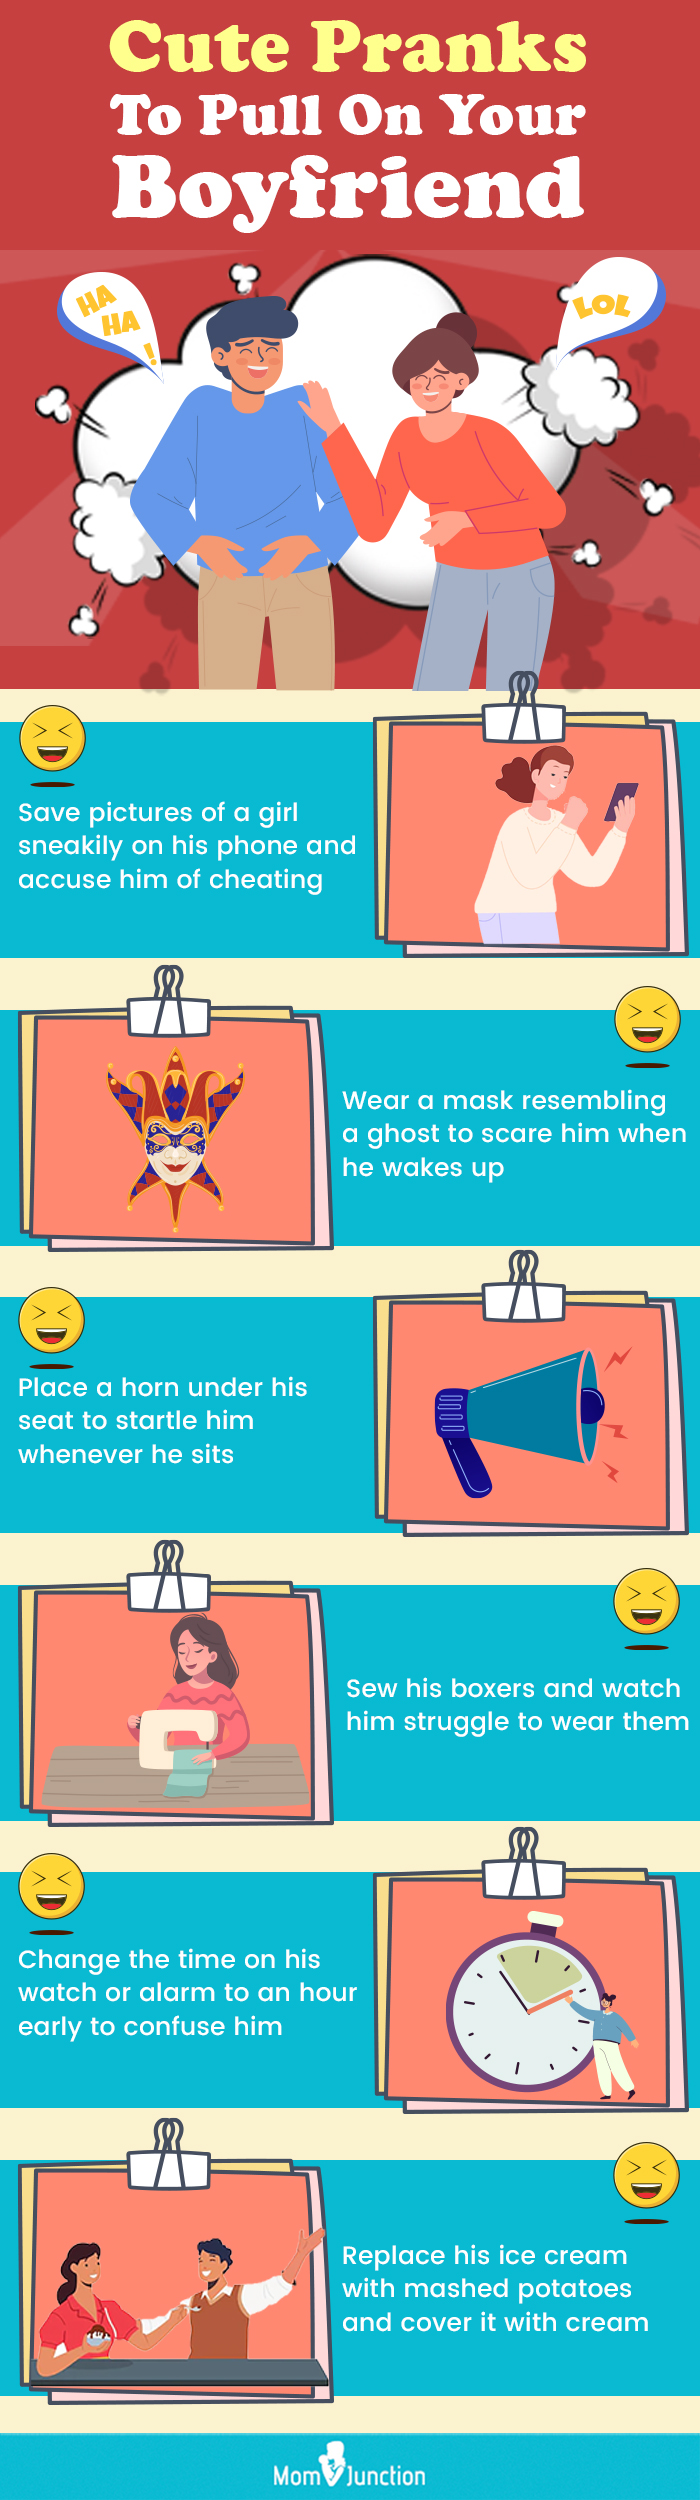 cute pranks to pull on your boyfriend (infographic)